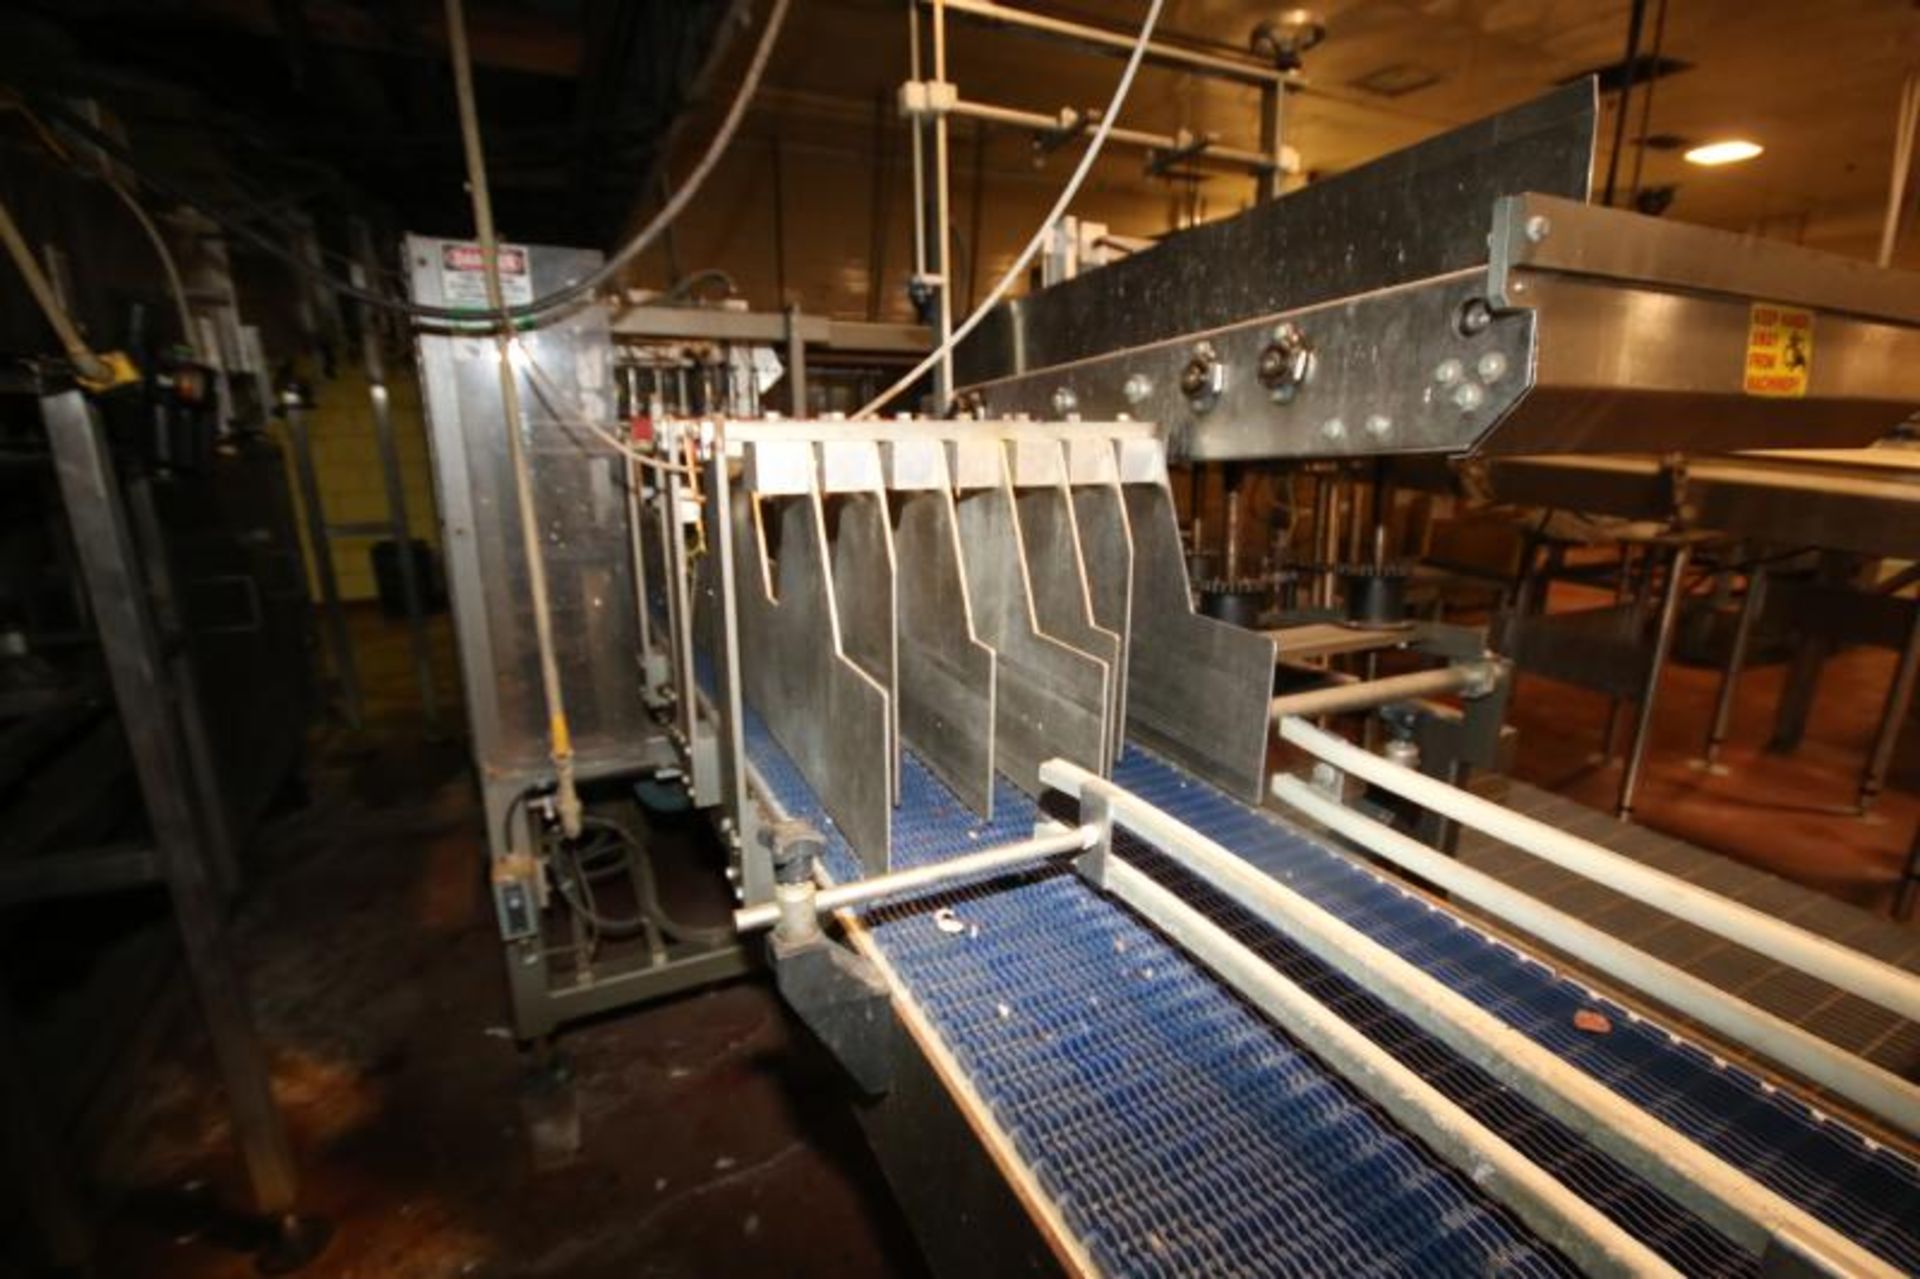 2000 Arpac Corrugated Tray Former / Packer, Model TS-25, S/N 4052, with Change Grid, Nordson - Image 8 of 15